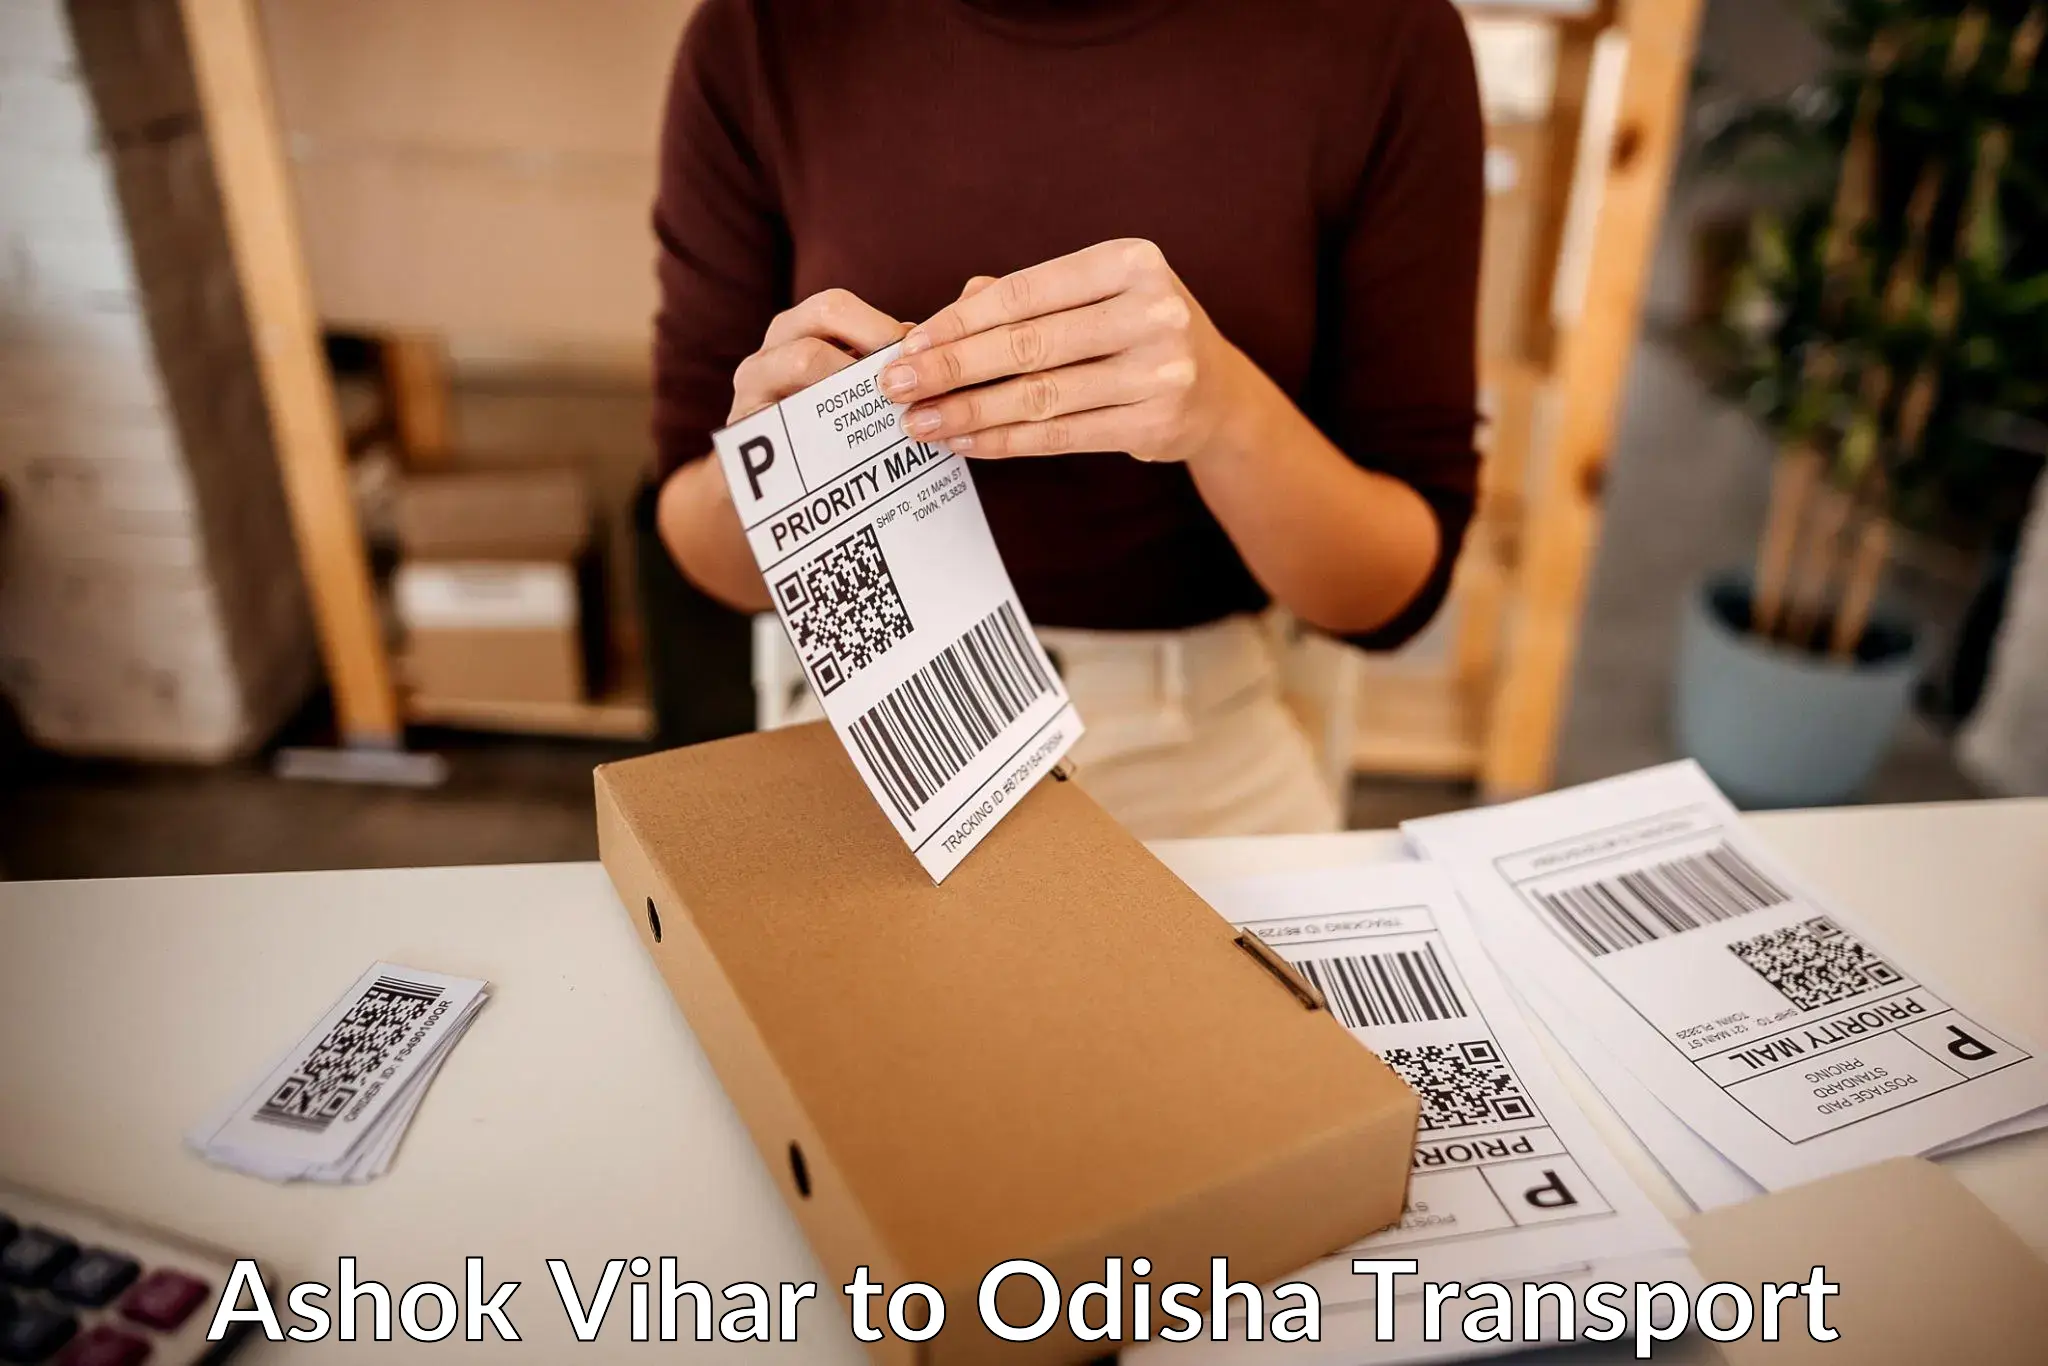 Truck transport companies in India Ashok Vihar to Cuttack